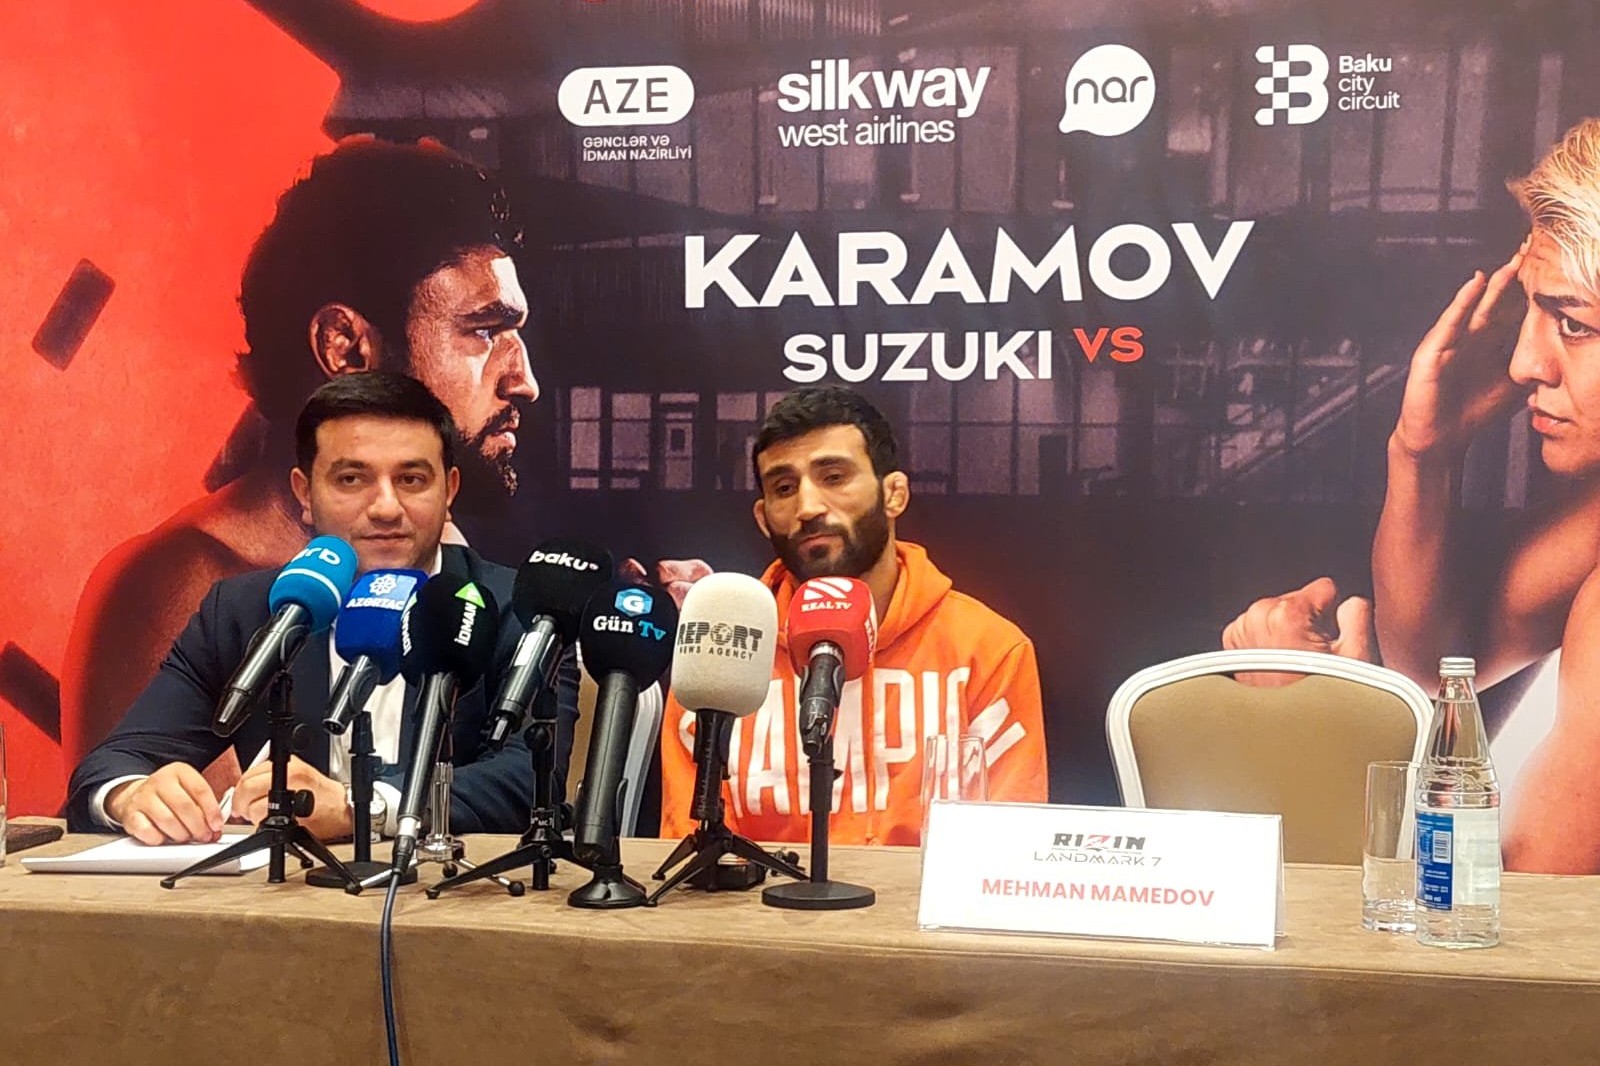 Mehman Mammadov: "I have no patience to fight for 3 rounds, I will try to win sooner"